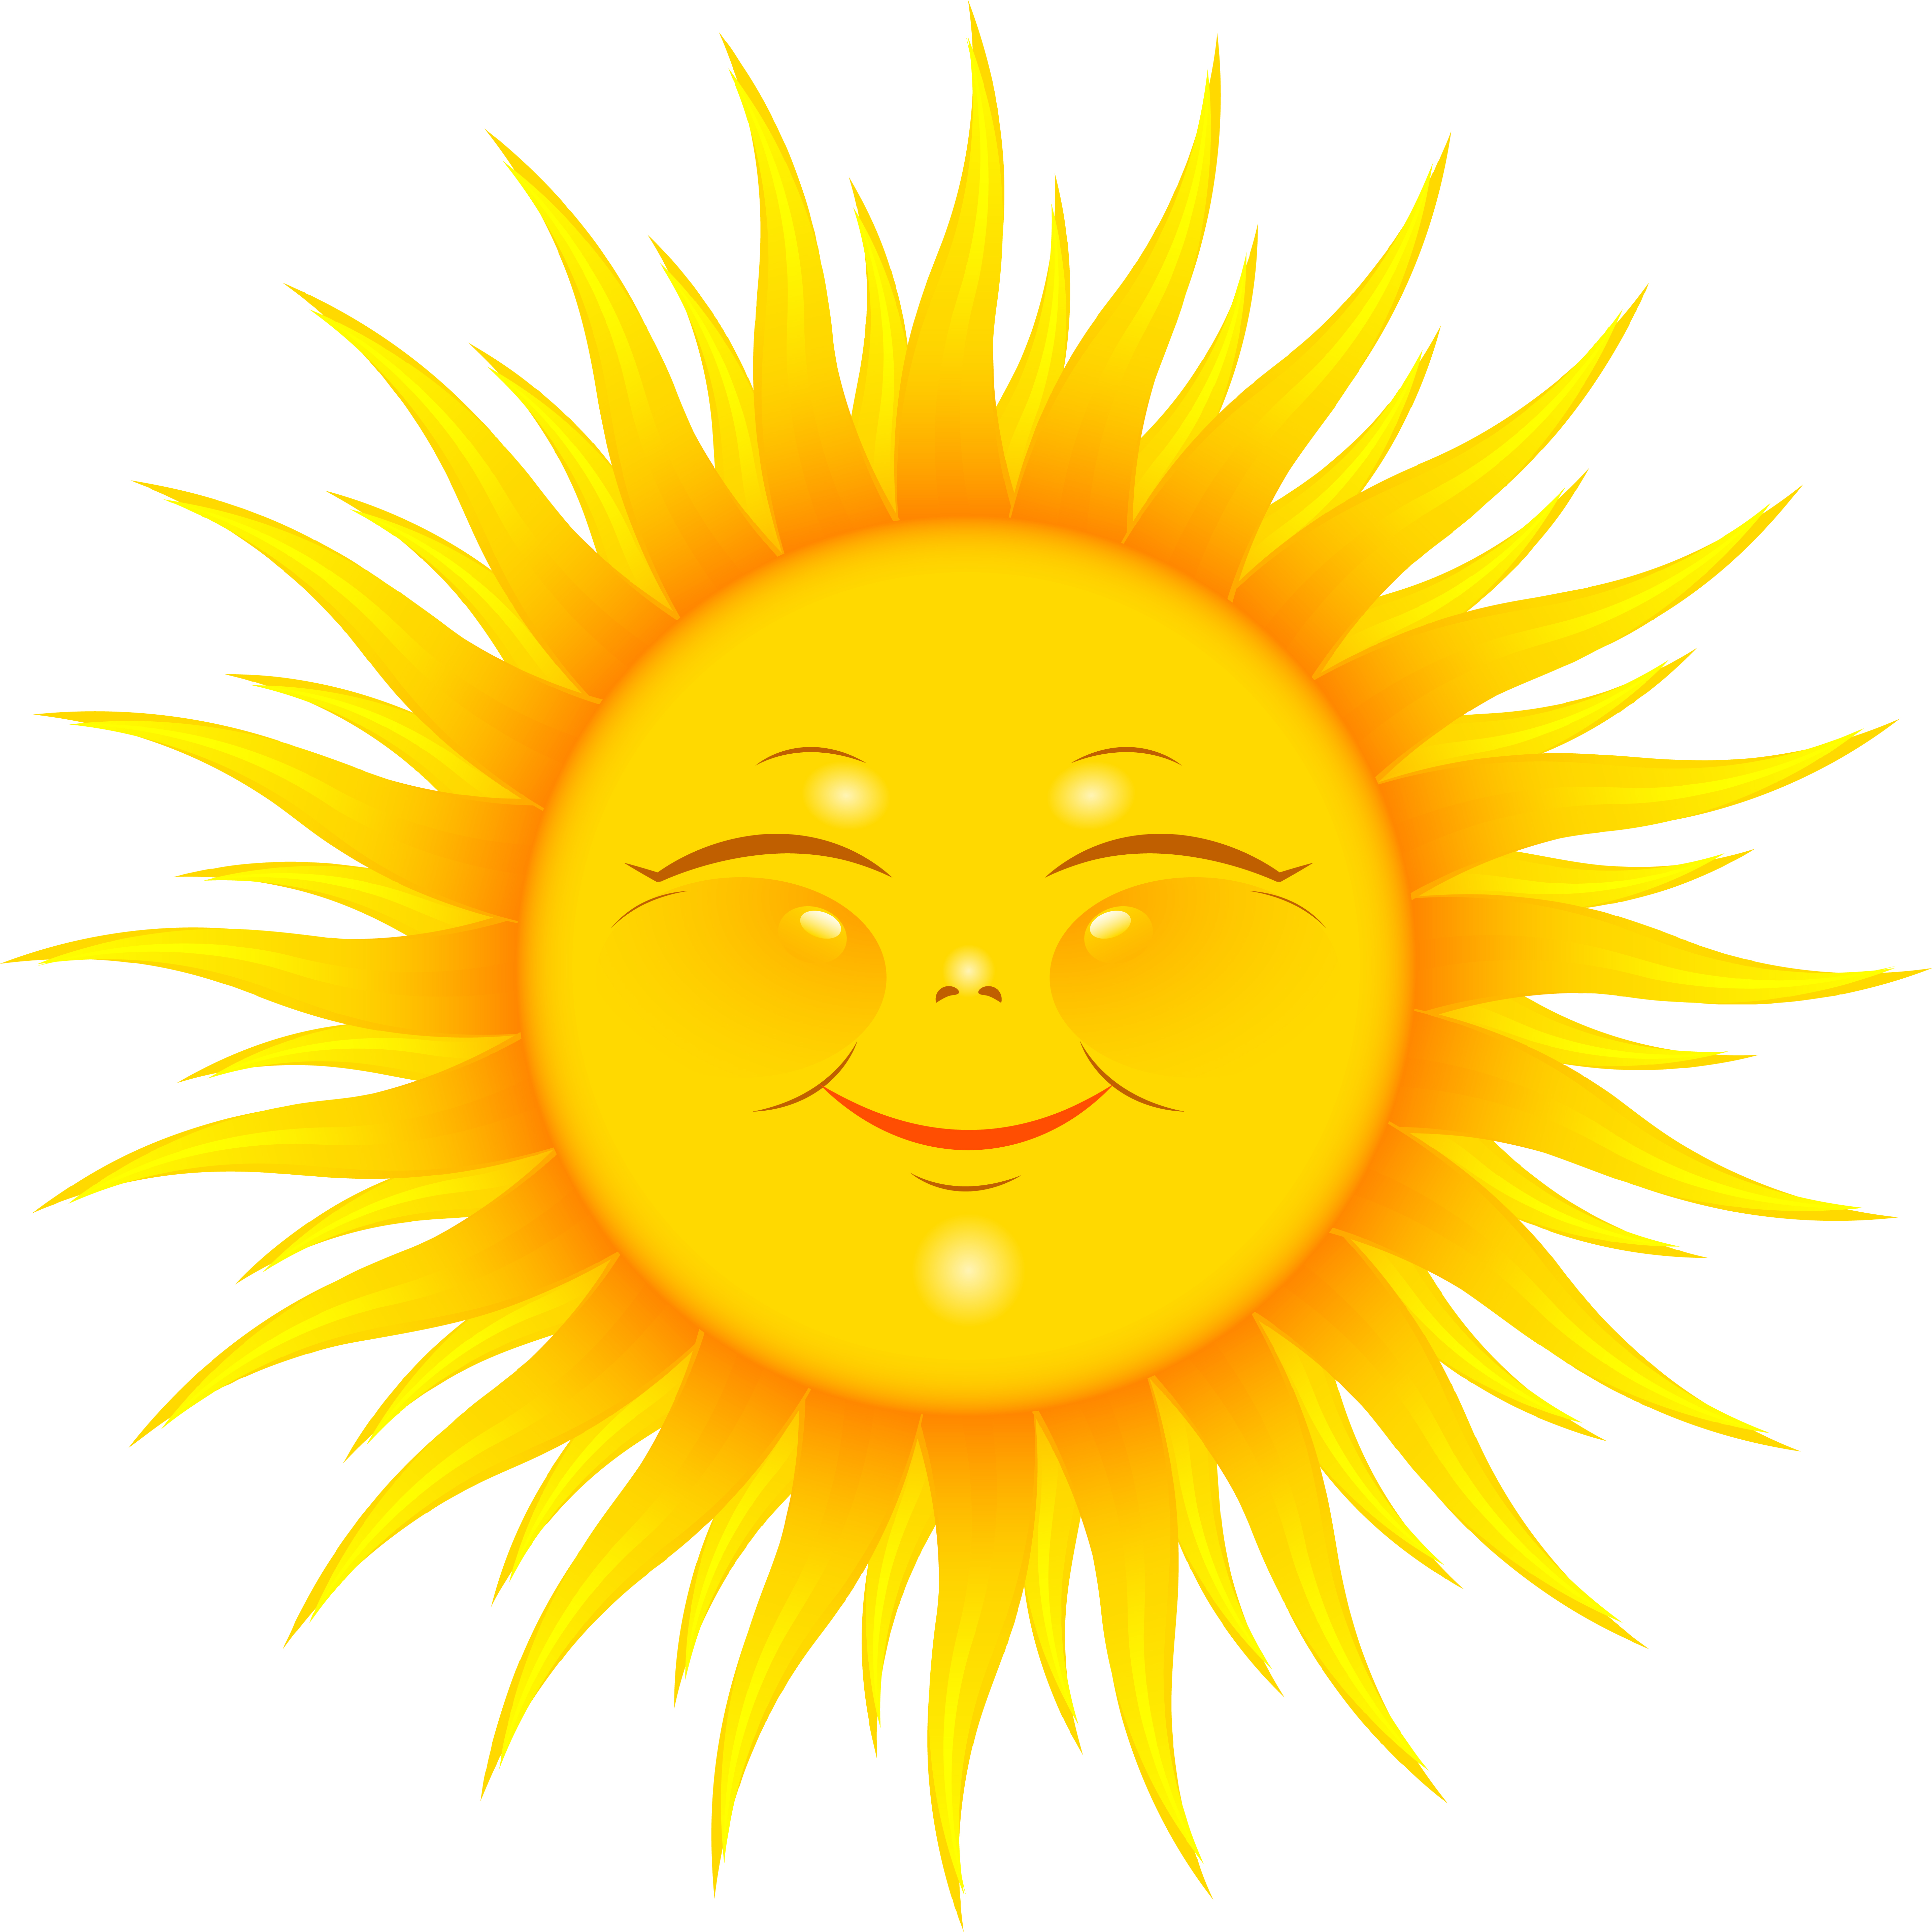 TaxConnections-Picture-Sun-Happy-Face-7-17-15-square.jpg